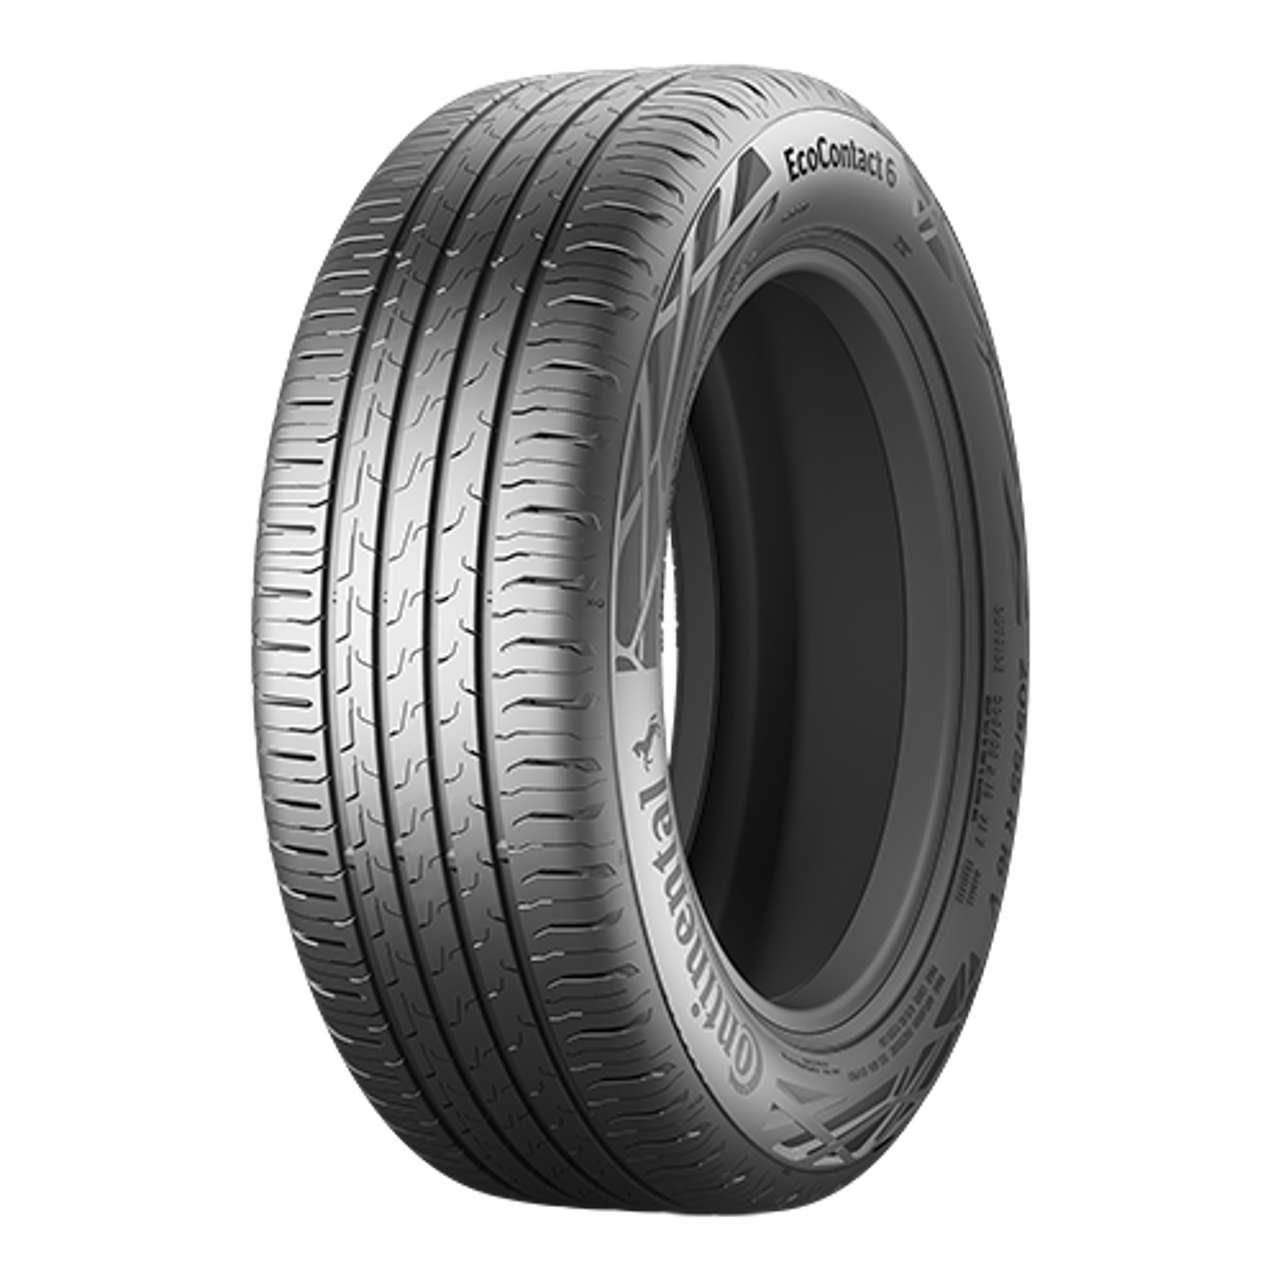 CONTINENTAL ECOCONTACT 6 (EVc) 205/55R16 91H von Continental